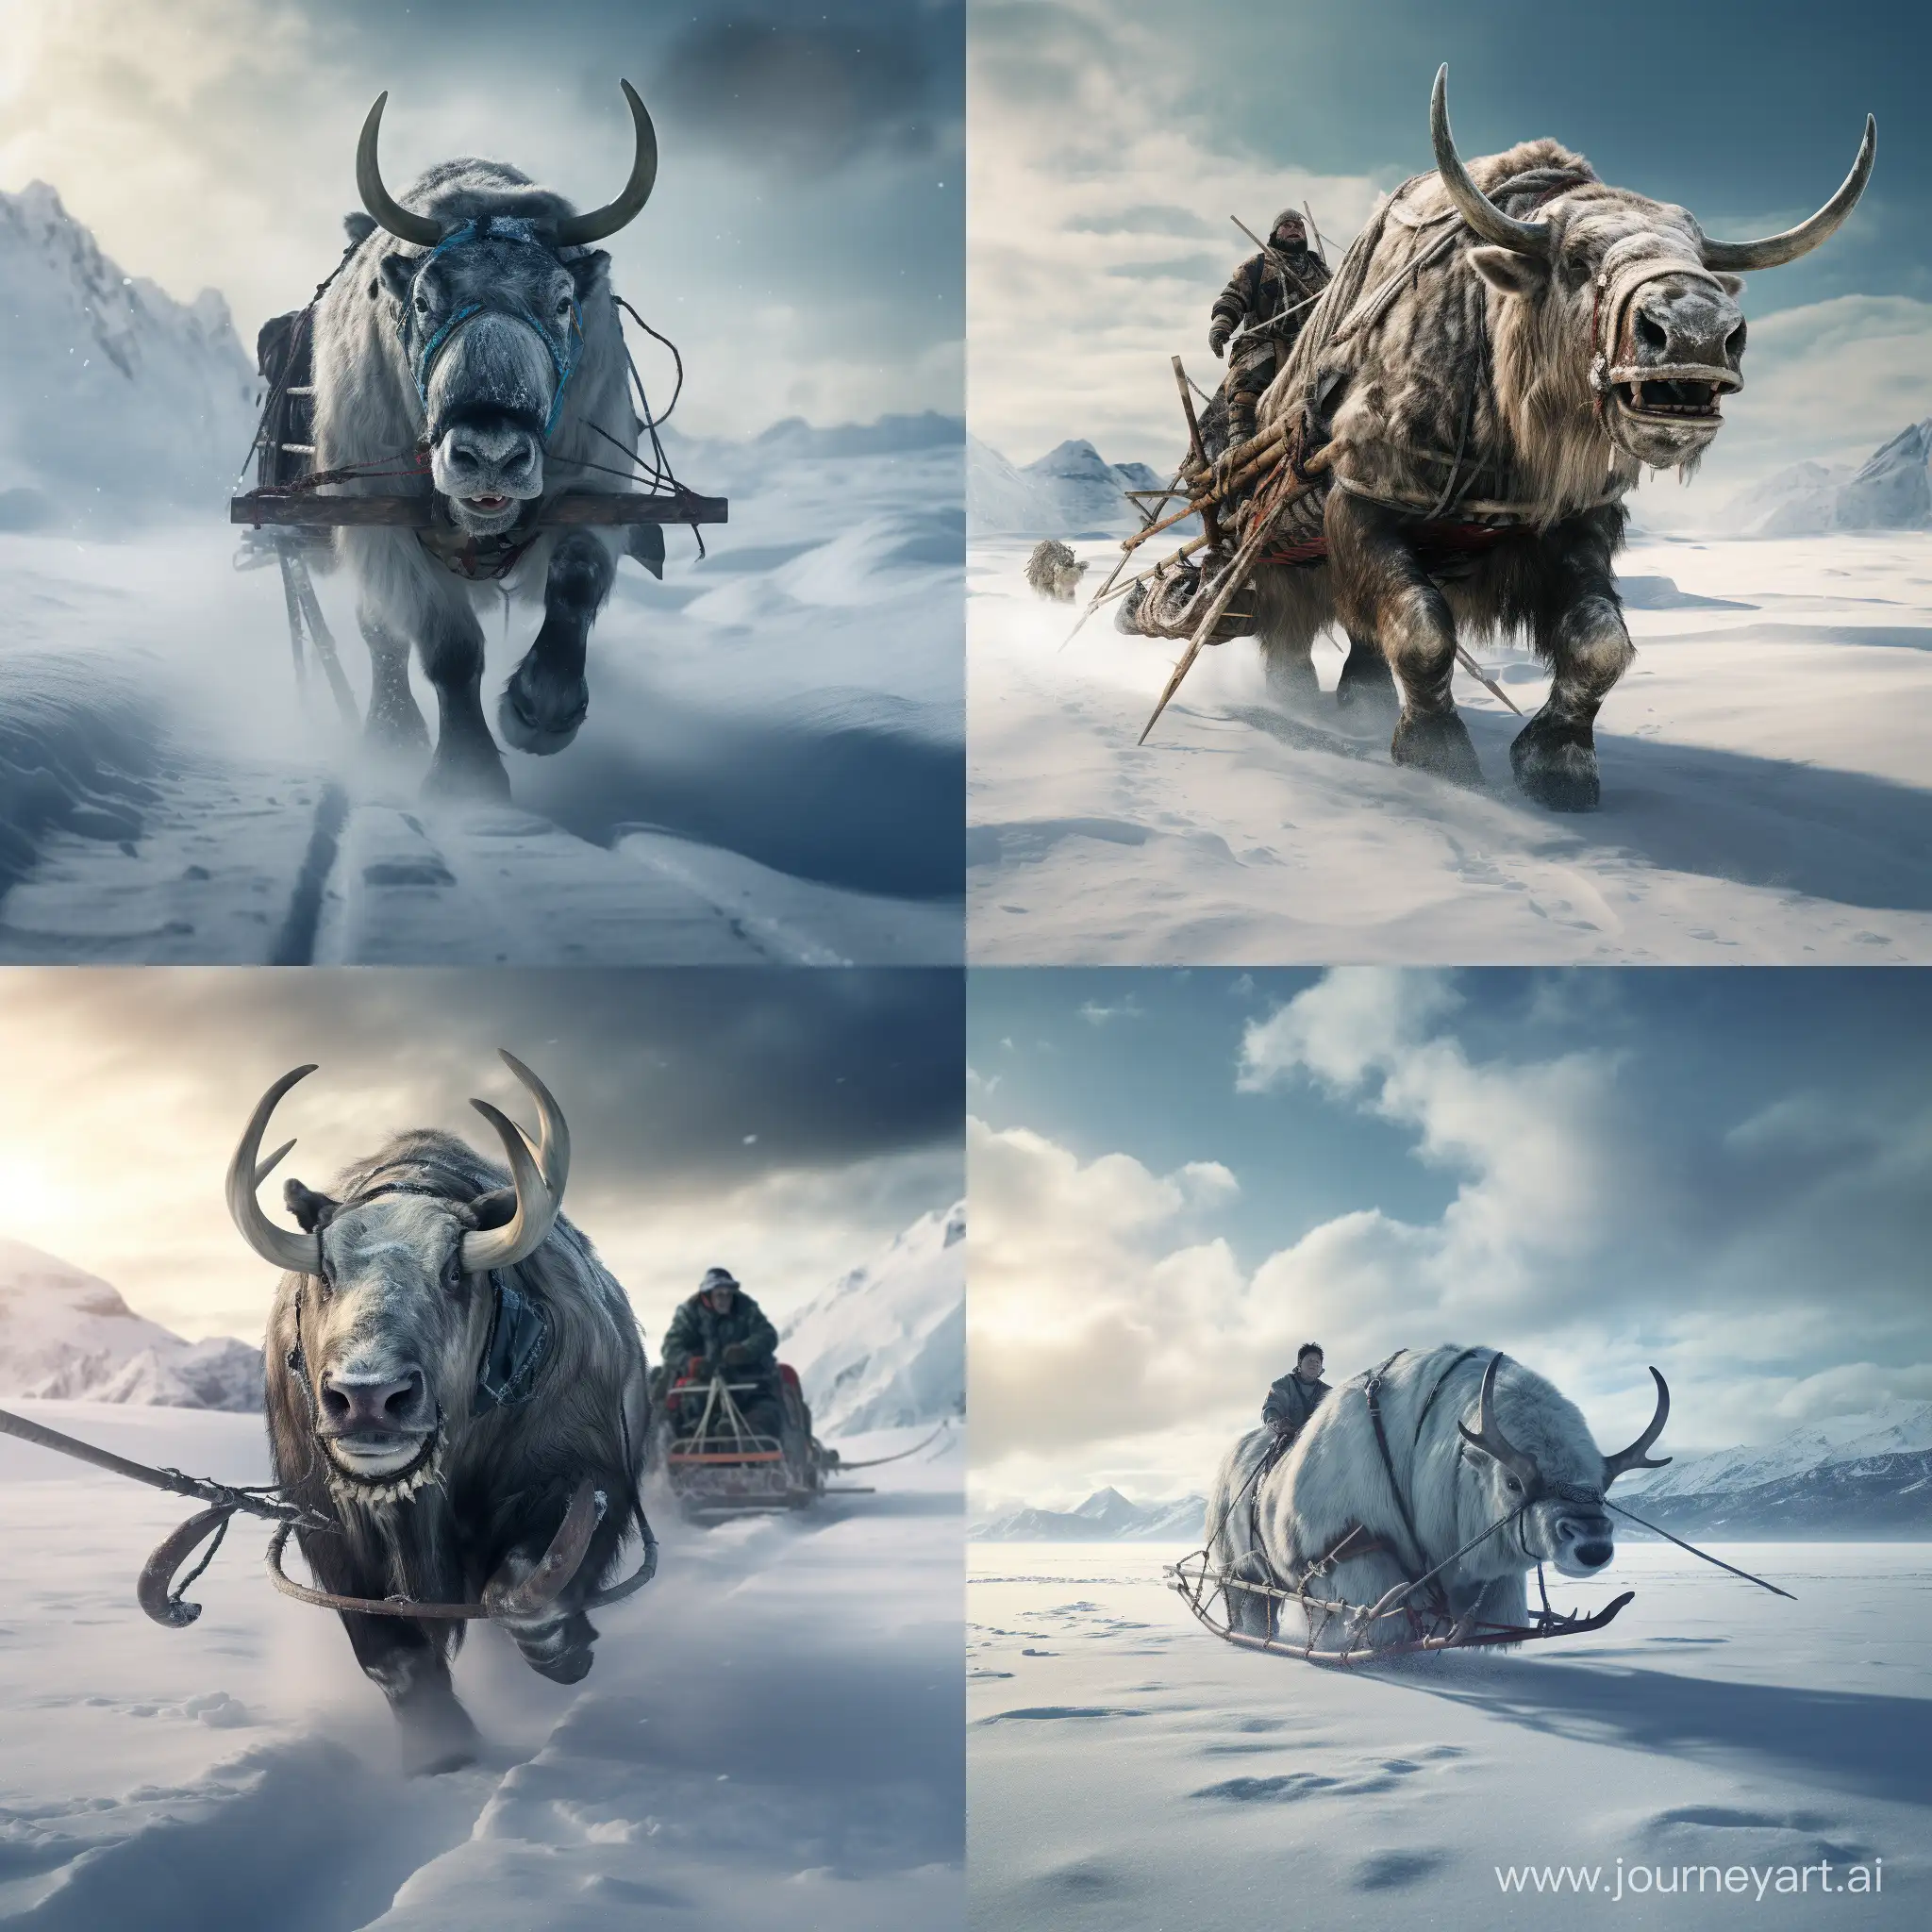 Arctic-Bull-Pulling-Sled-Powerful-Scene-of-Arctic-Strength-and-Tradition